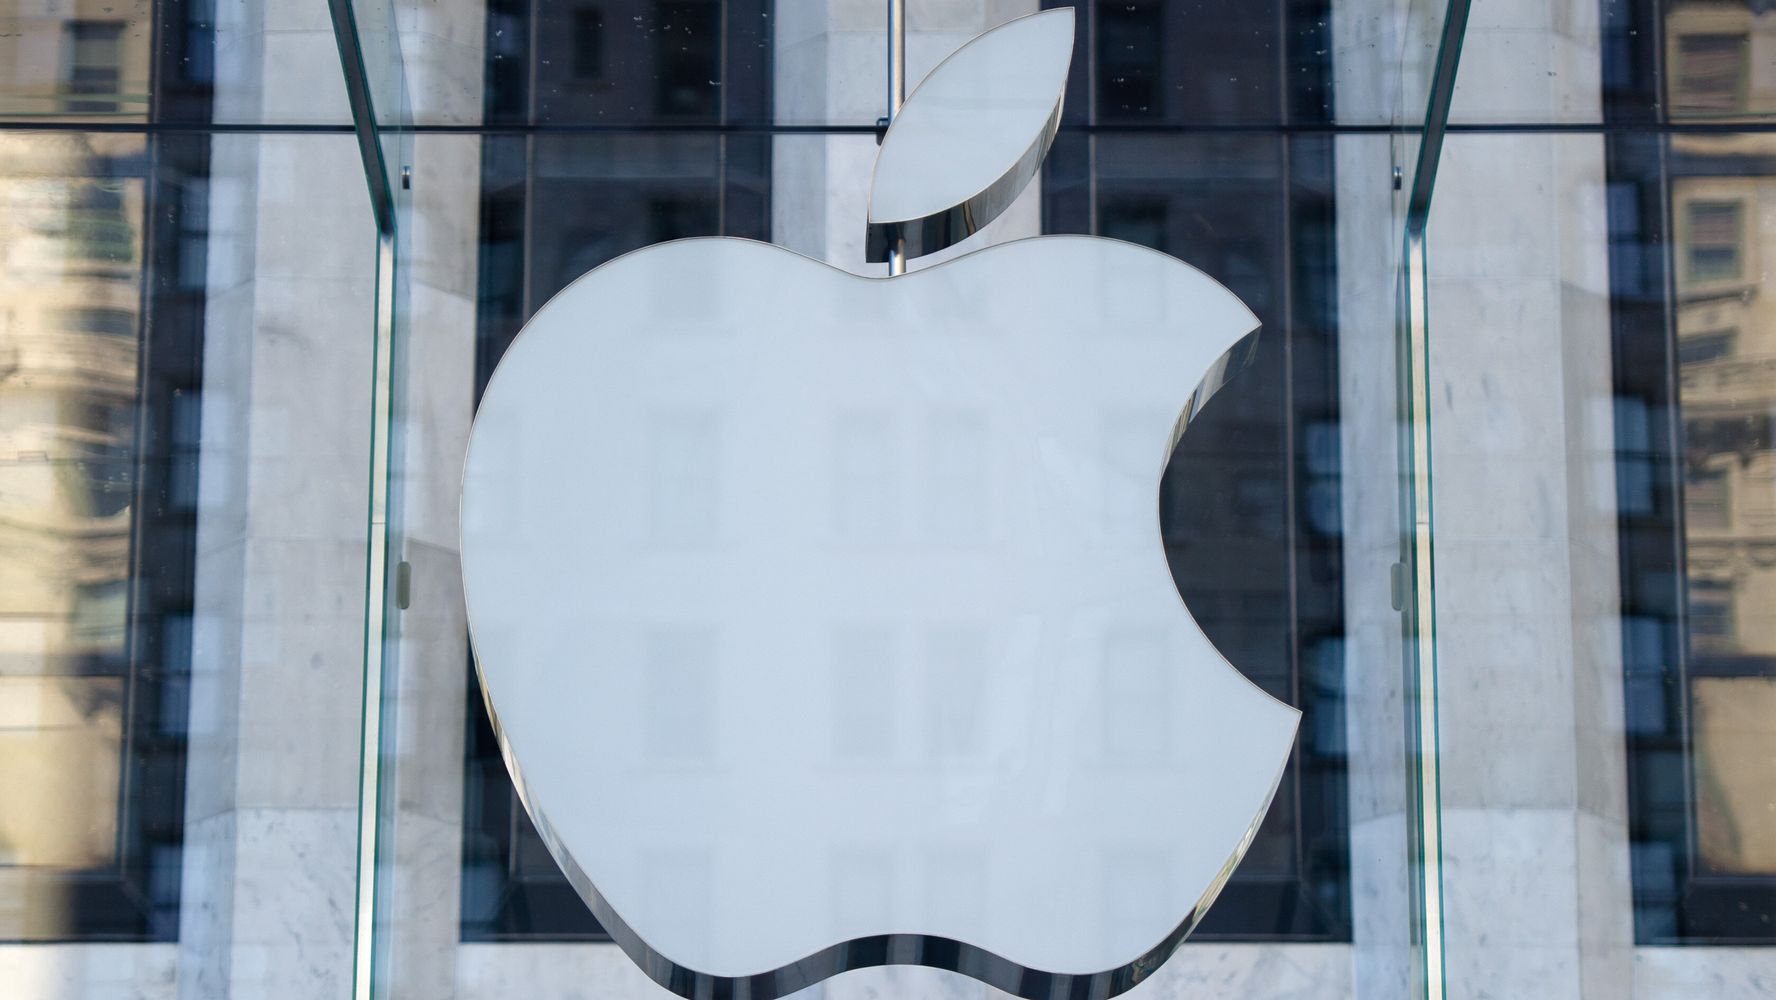 Report About Windowless Apple Car Met With Heavy Dose Of Mockery - HuffPost